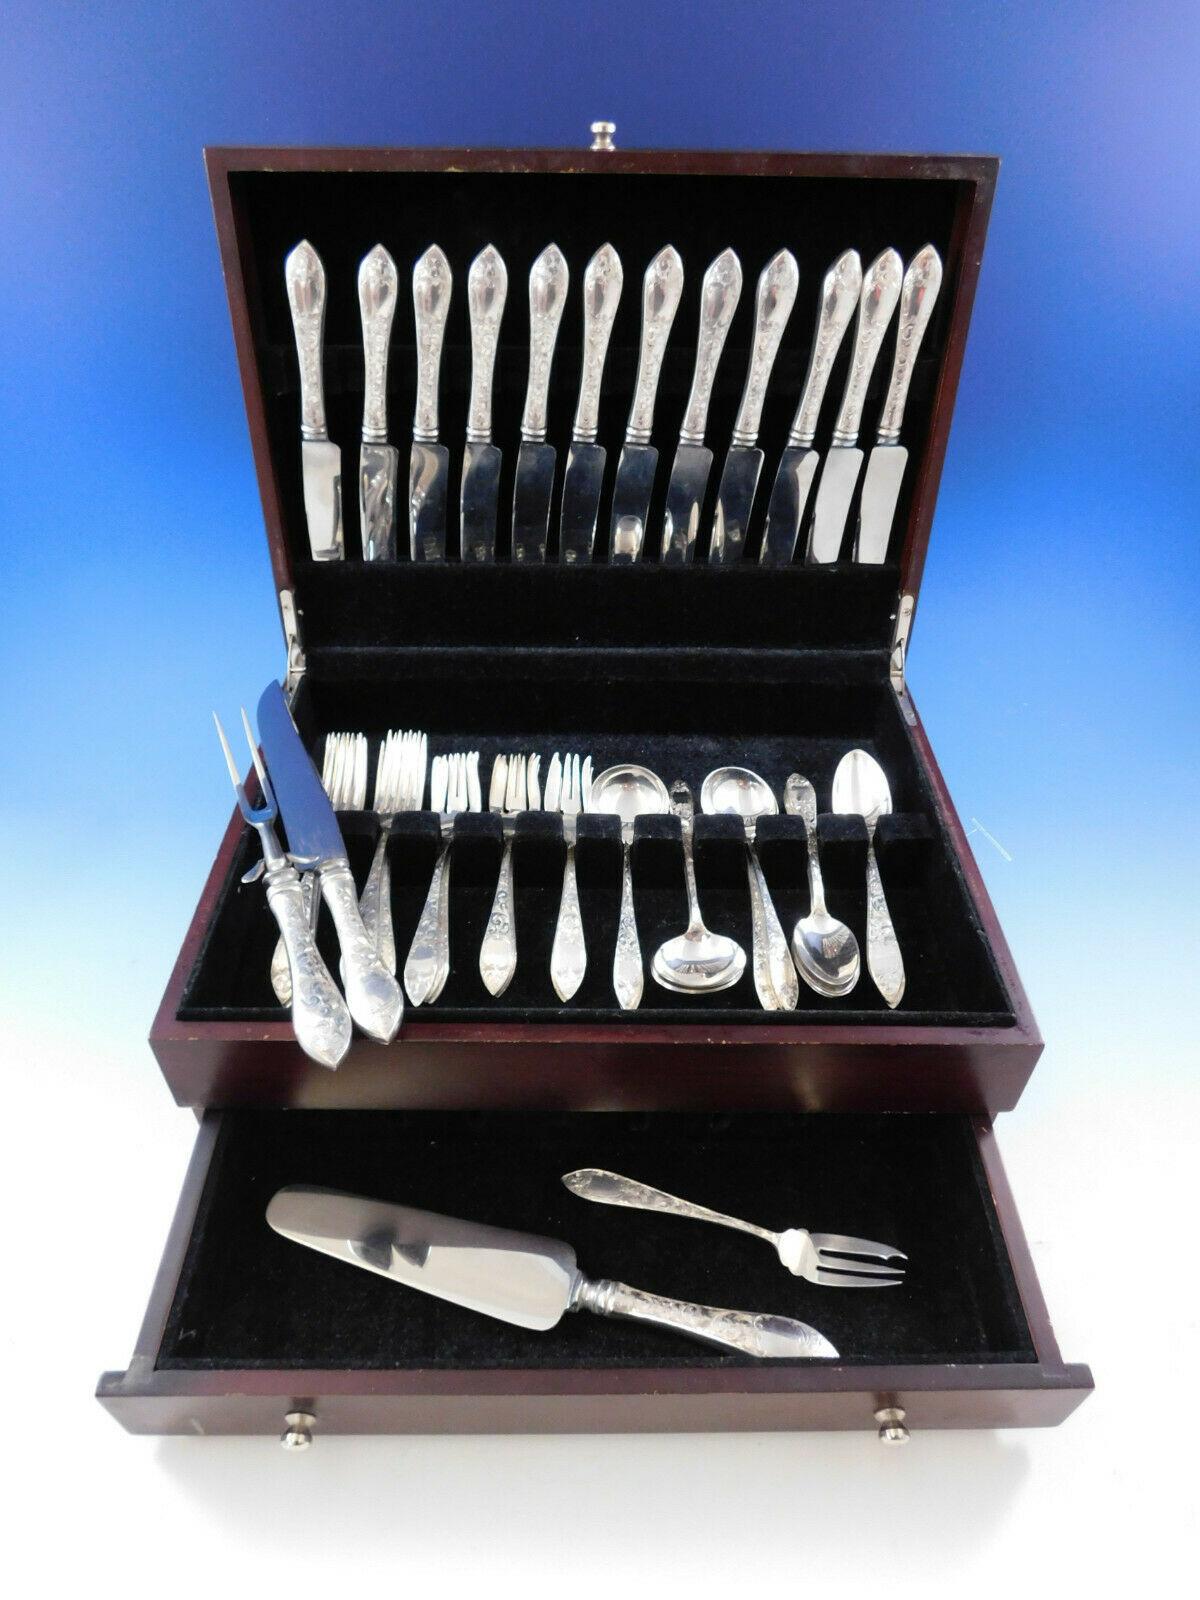 Lorraine by Schofield bright-cut sterling silver flatware set, 44 pieces. This set includes:

8 knives, 9